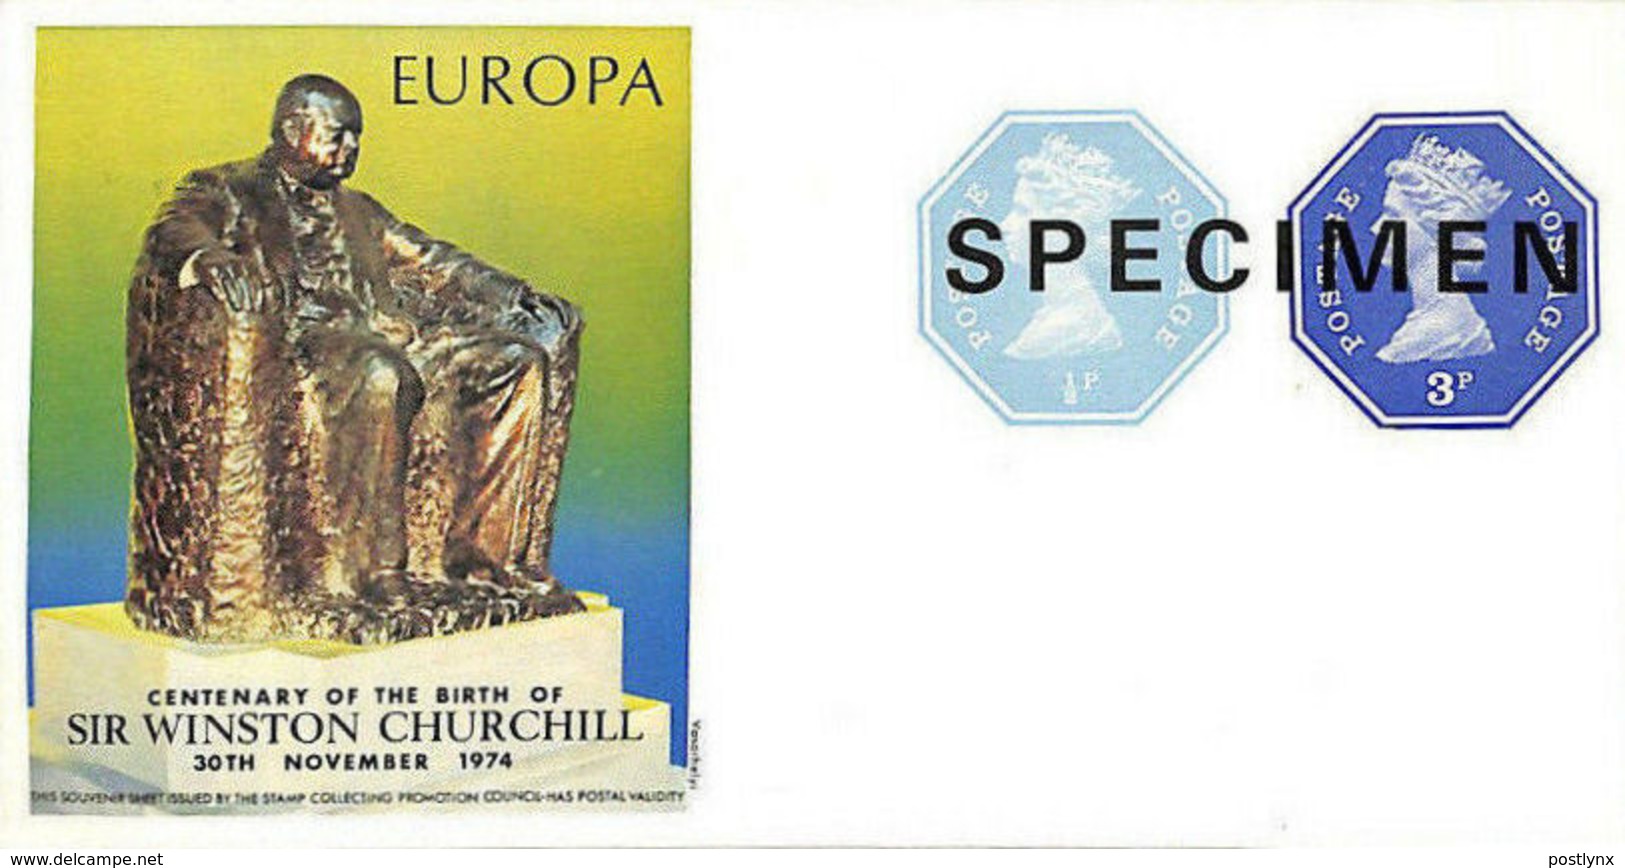 GREAT BRITAIN 1974 Monument EUROPA Churchill Machines ½p+3p SPECIMEN IMPERF:sheetlet - Ongetand